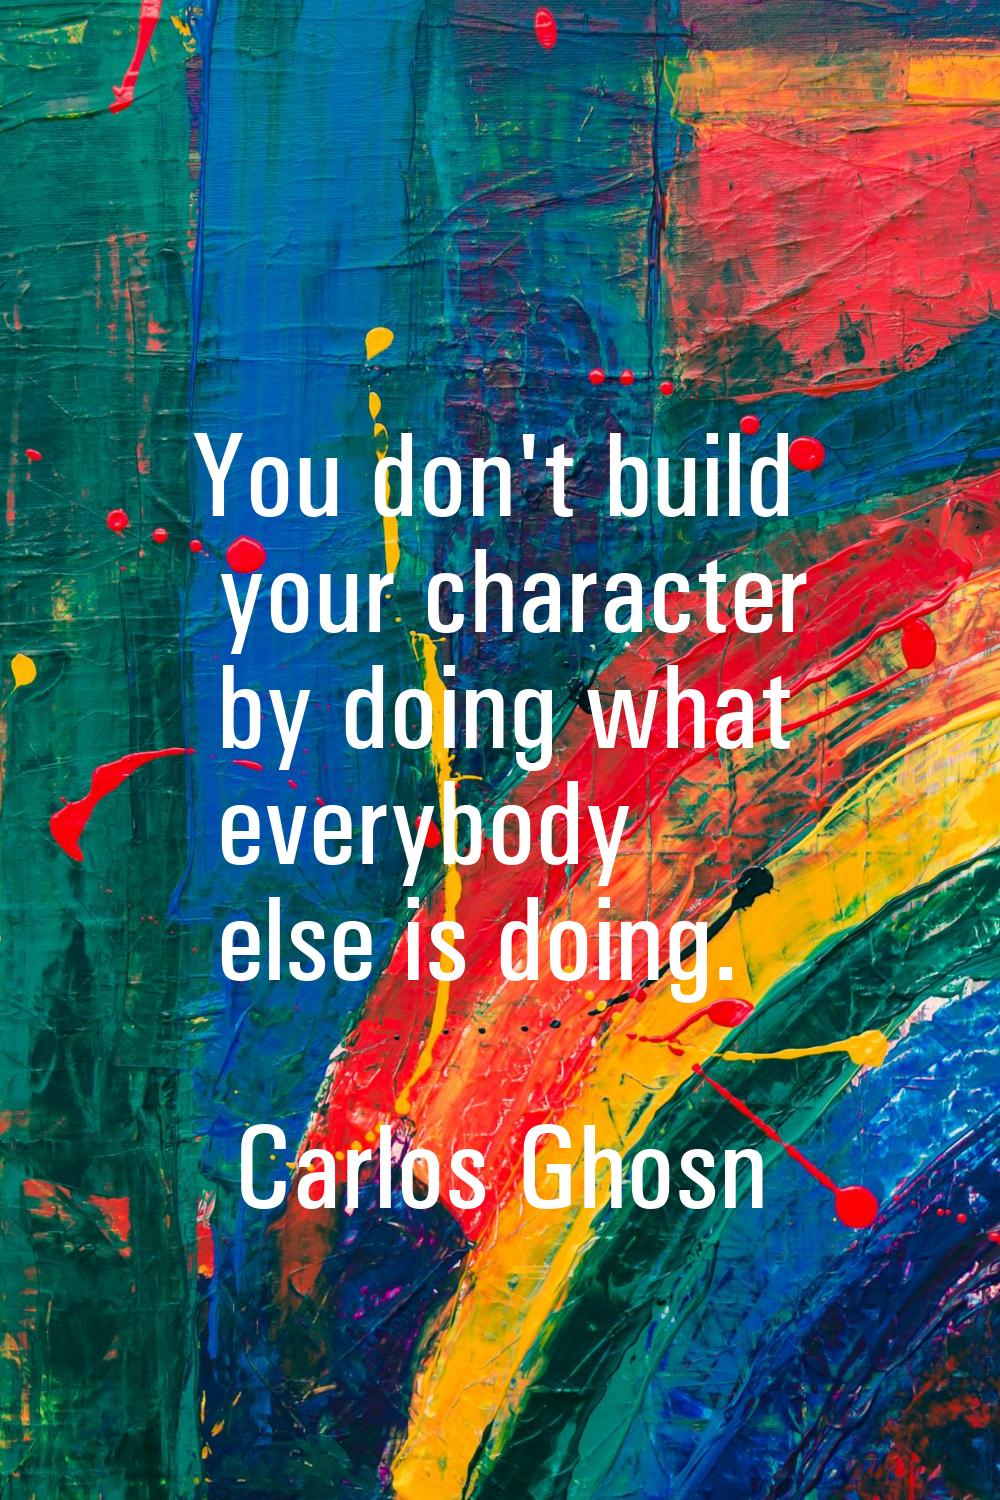 You don't build your character by doing what everybody else is doing.